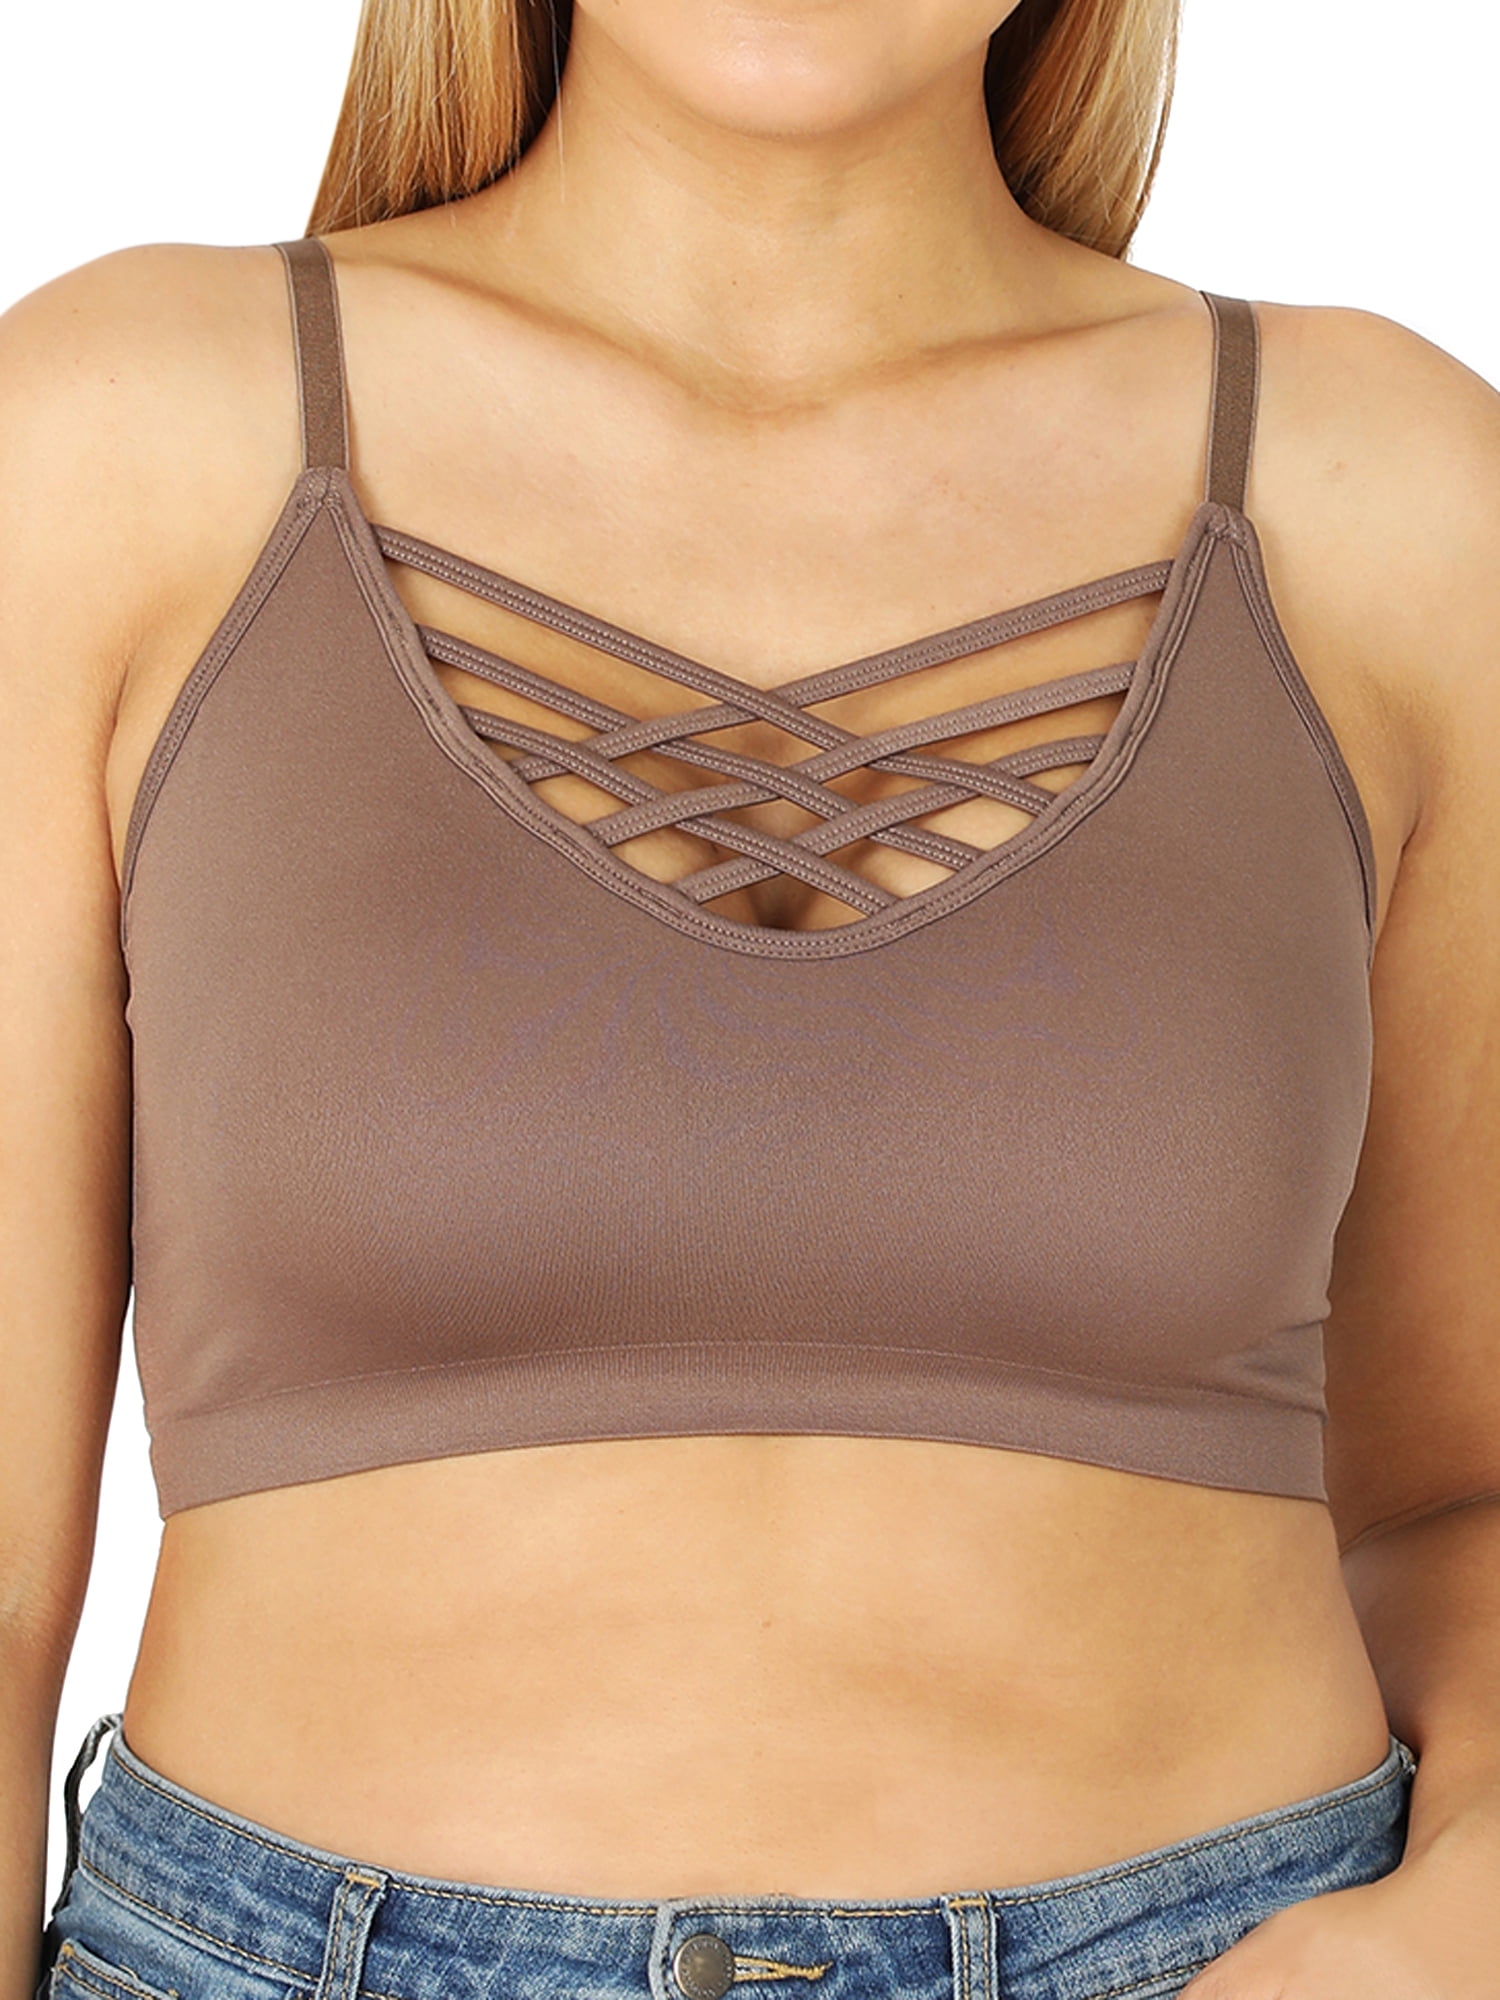 TheLovely Women & Plus Comfort Seamless Crisscross Front Strappy Bralette  Sports Bra Top with Removable Pads 